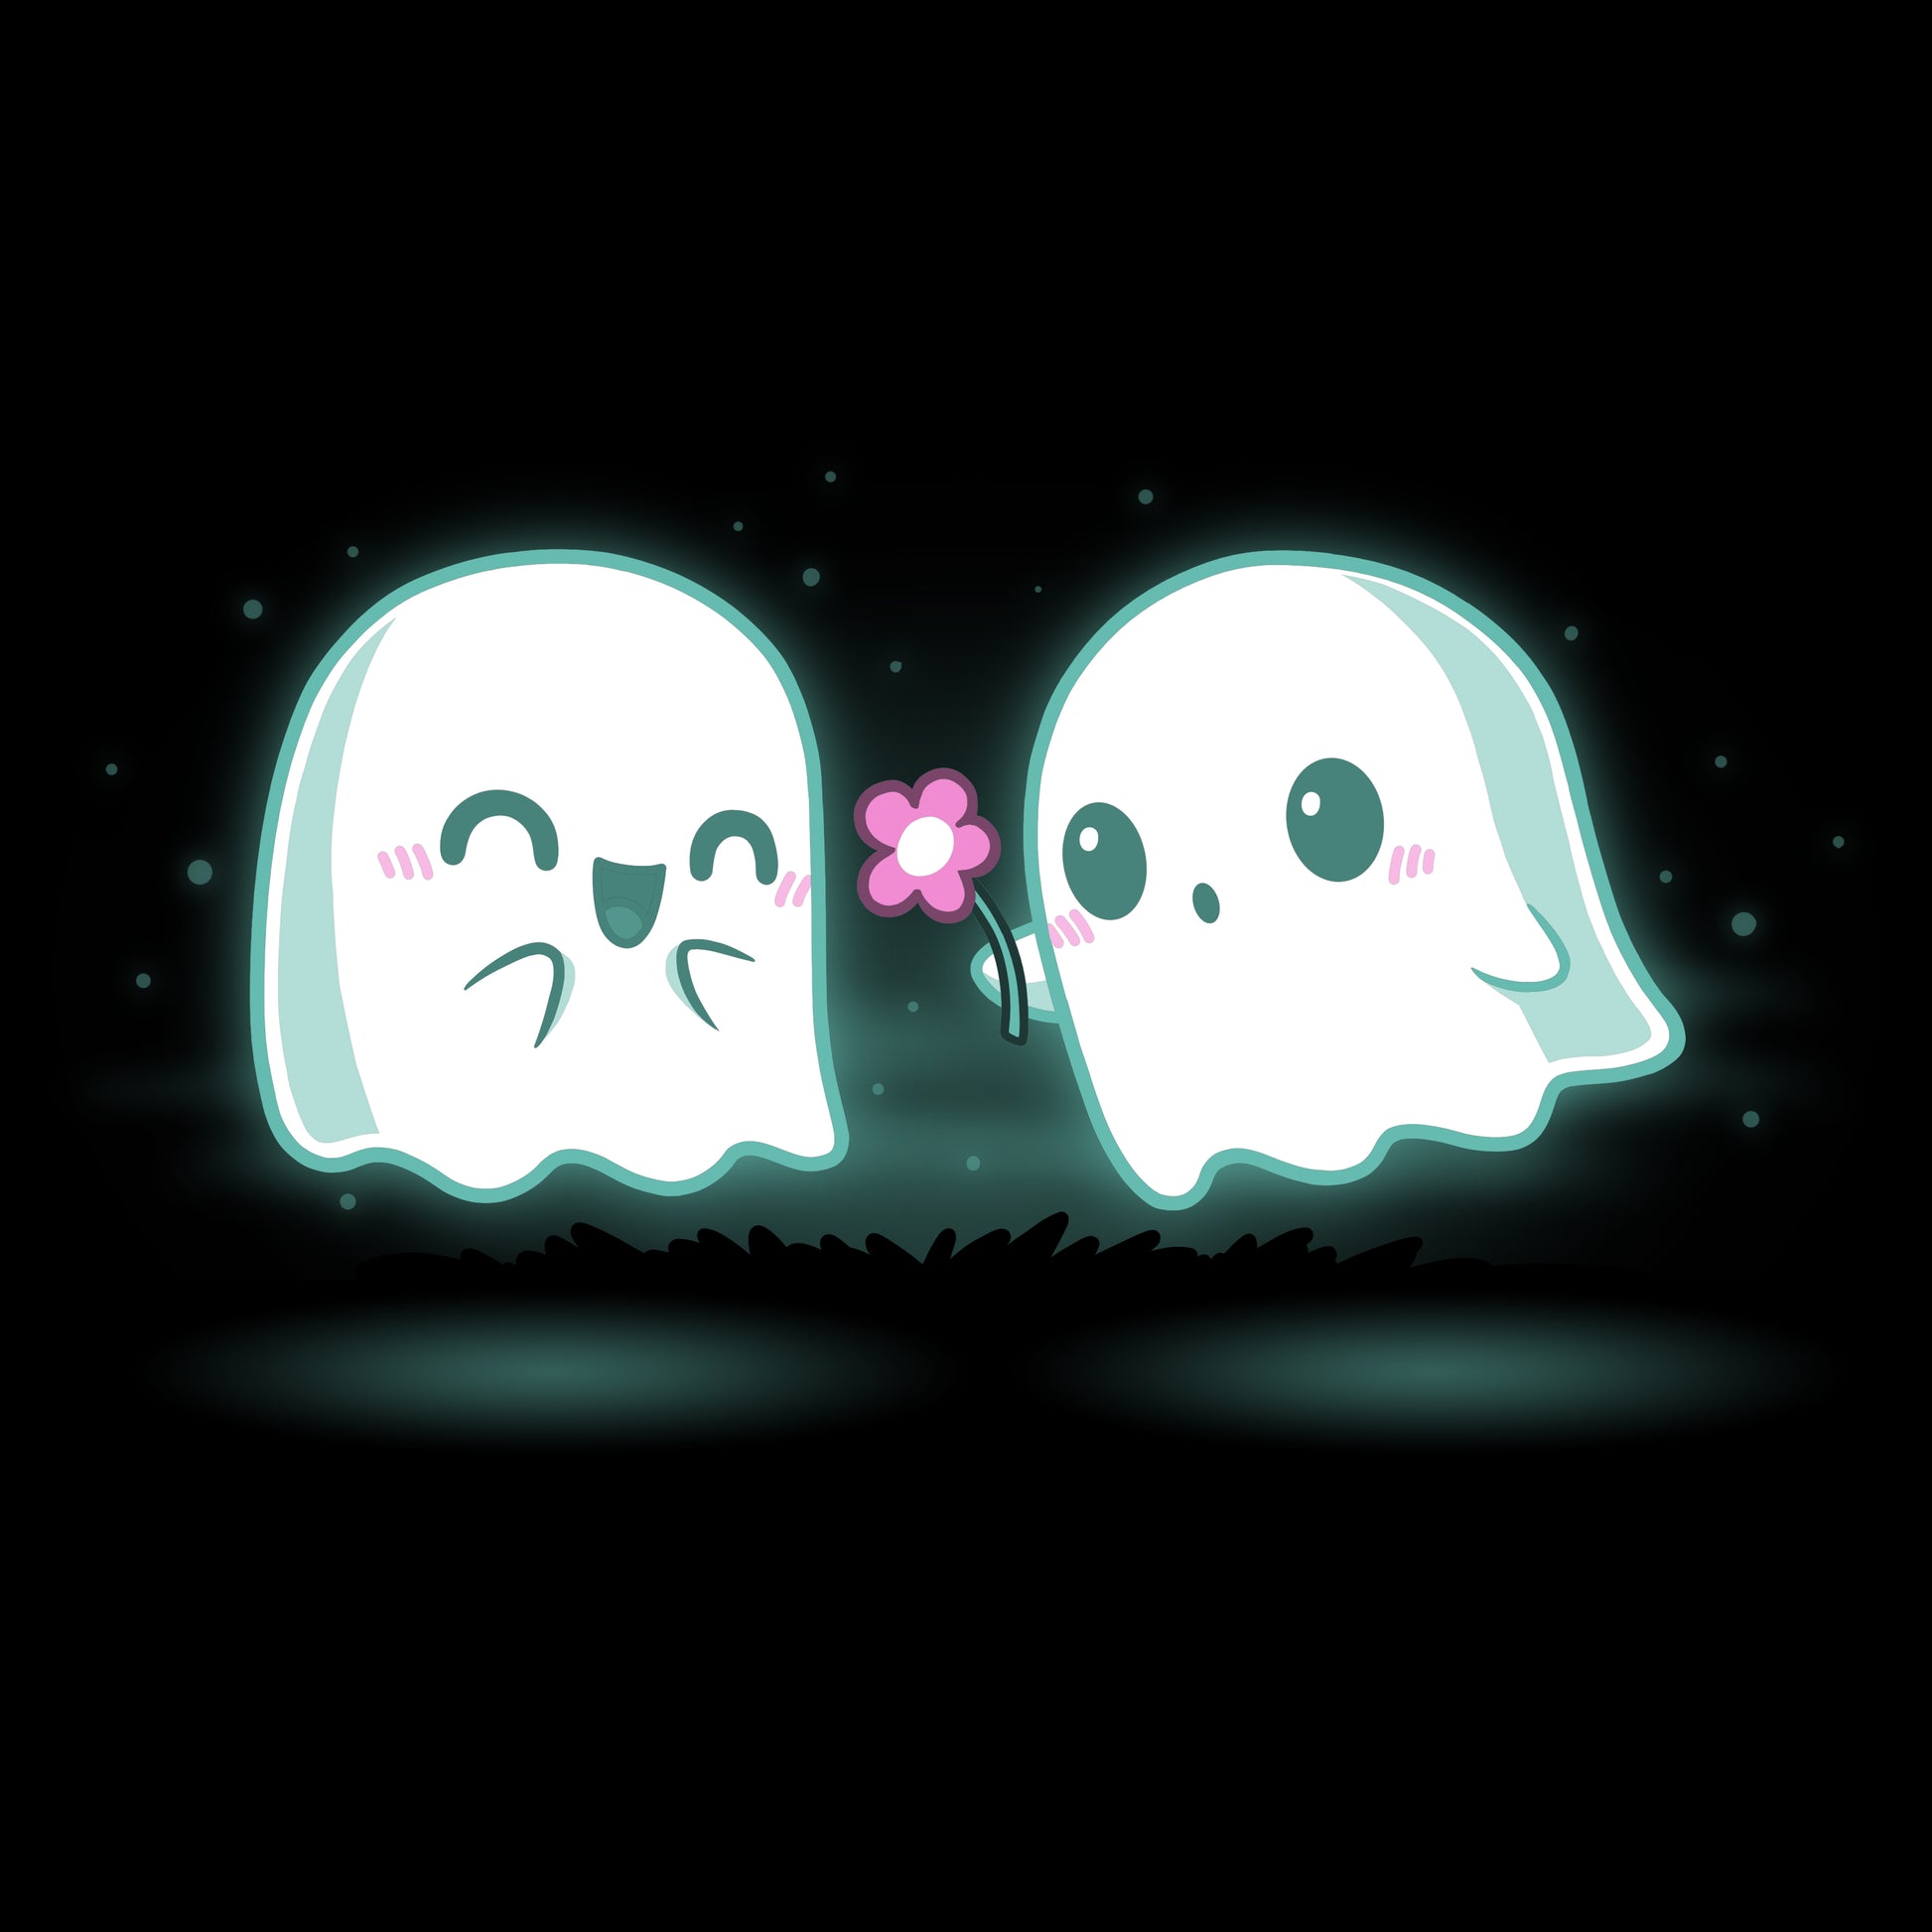 TeeTurtle One Boo Love t-shirt featuring two ghosts holding a flower in the dark with One Boo Love theme.